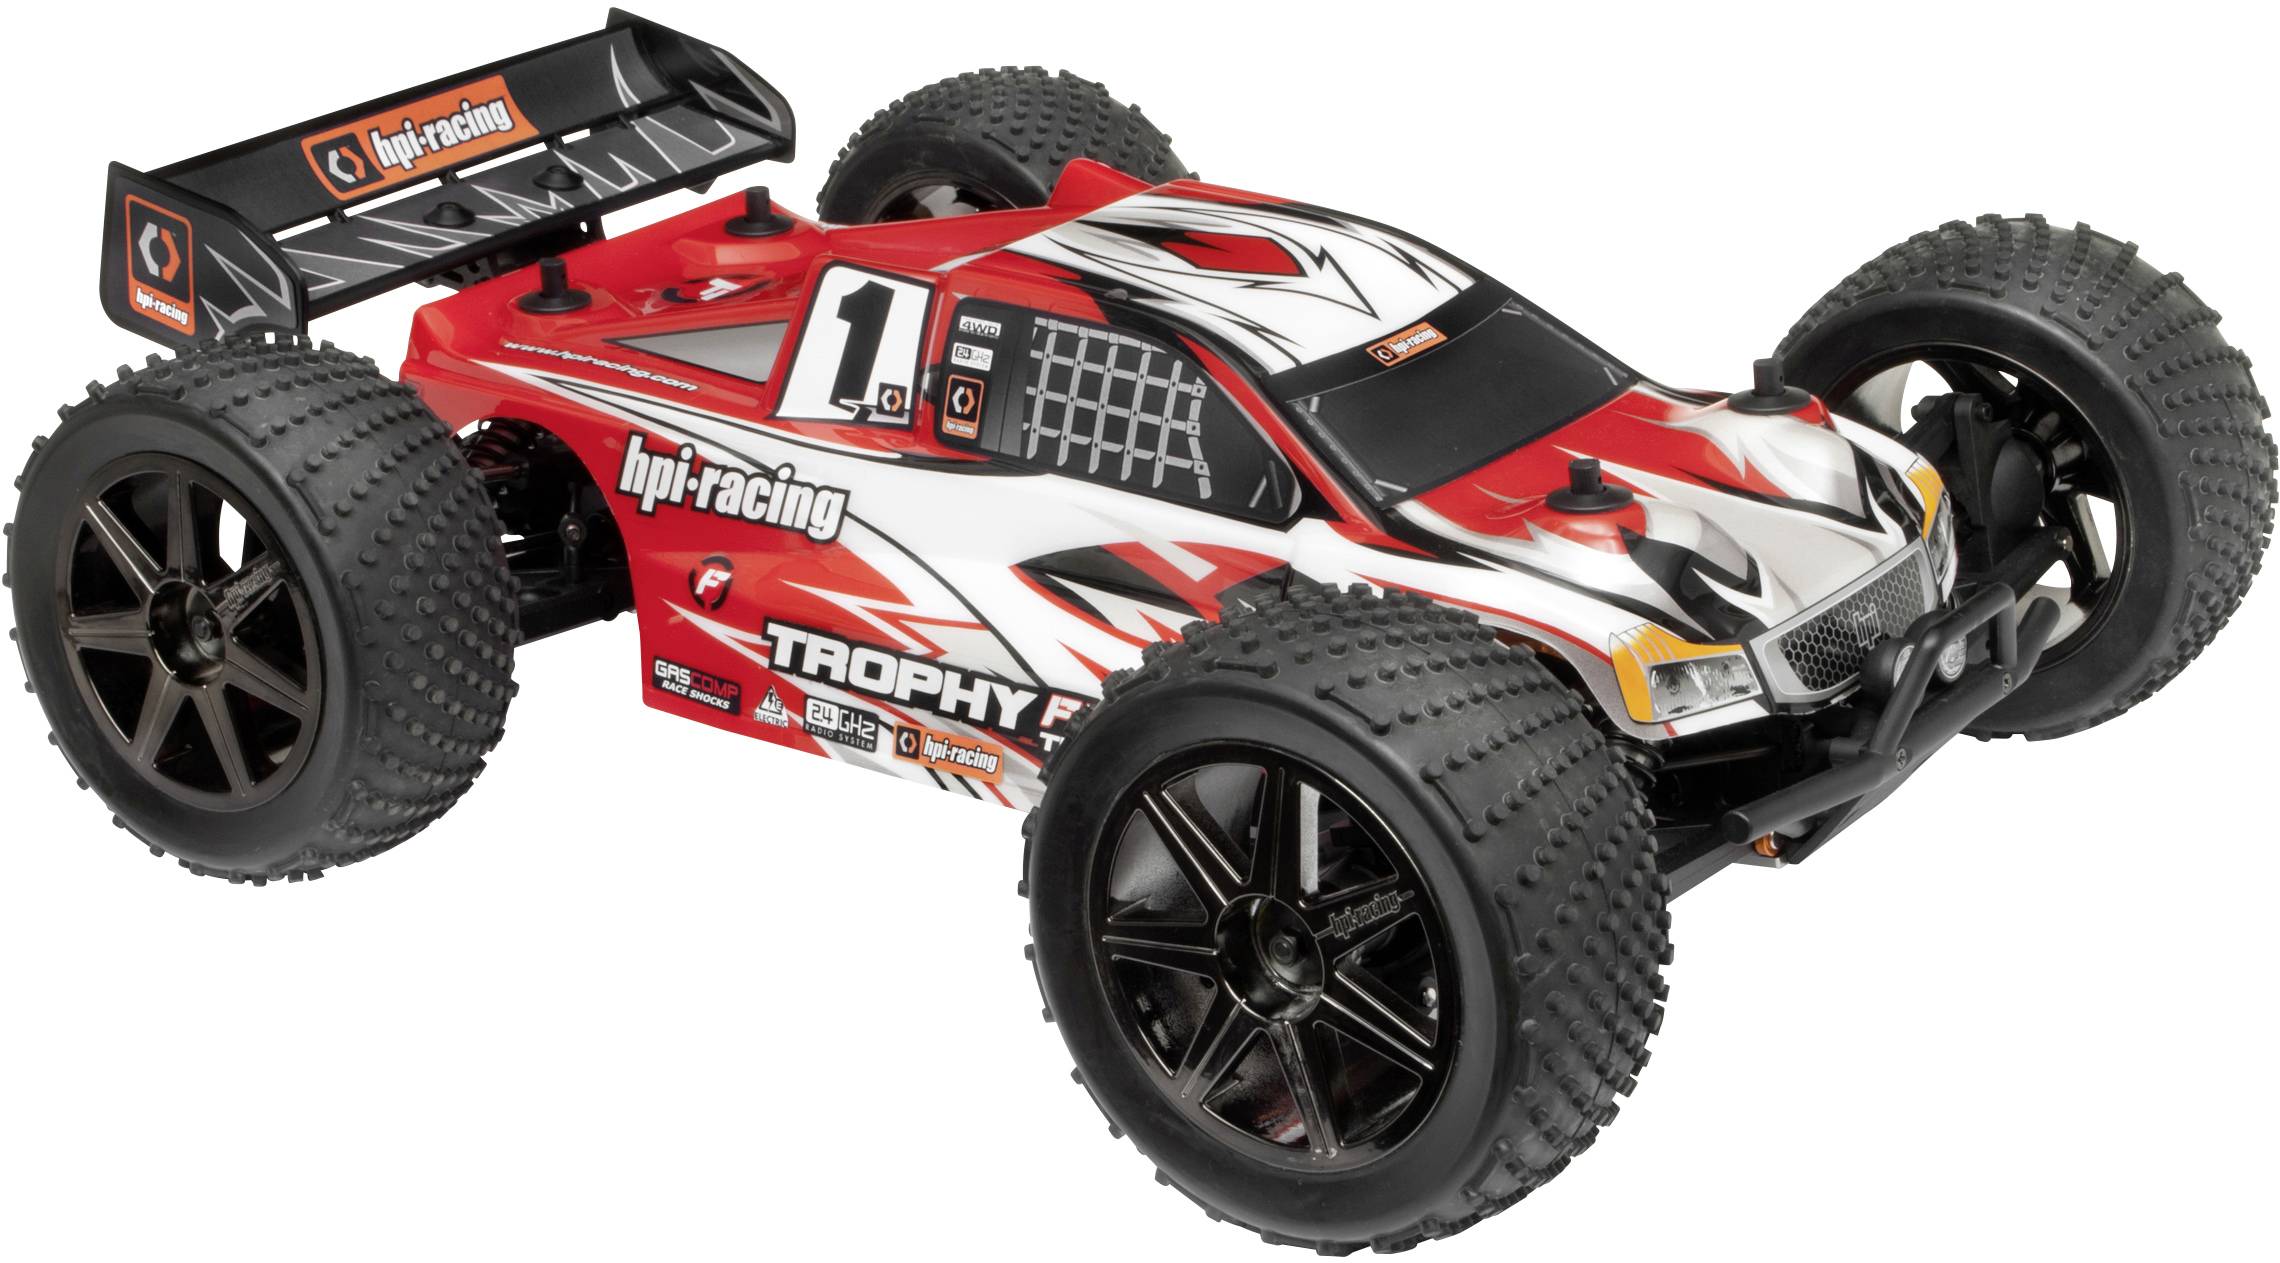 HPI Racing Trophy Flux Brushless 255:255 RC model car Electric Truggy 255WD RtR  25,255 GHz